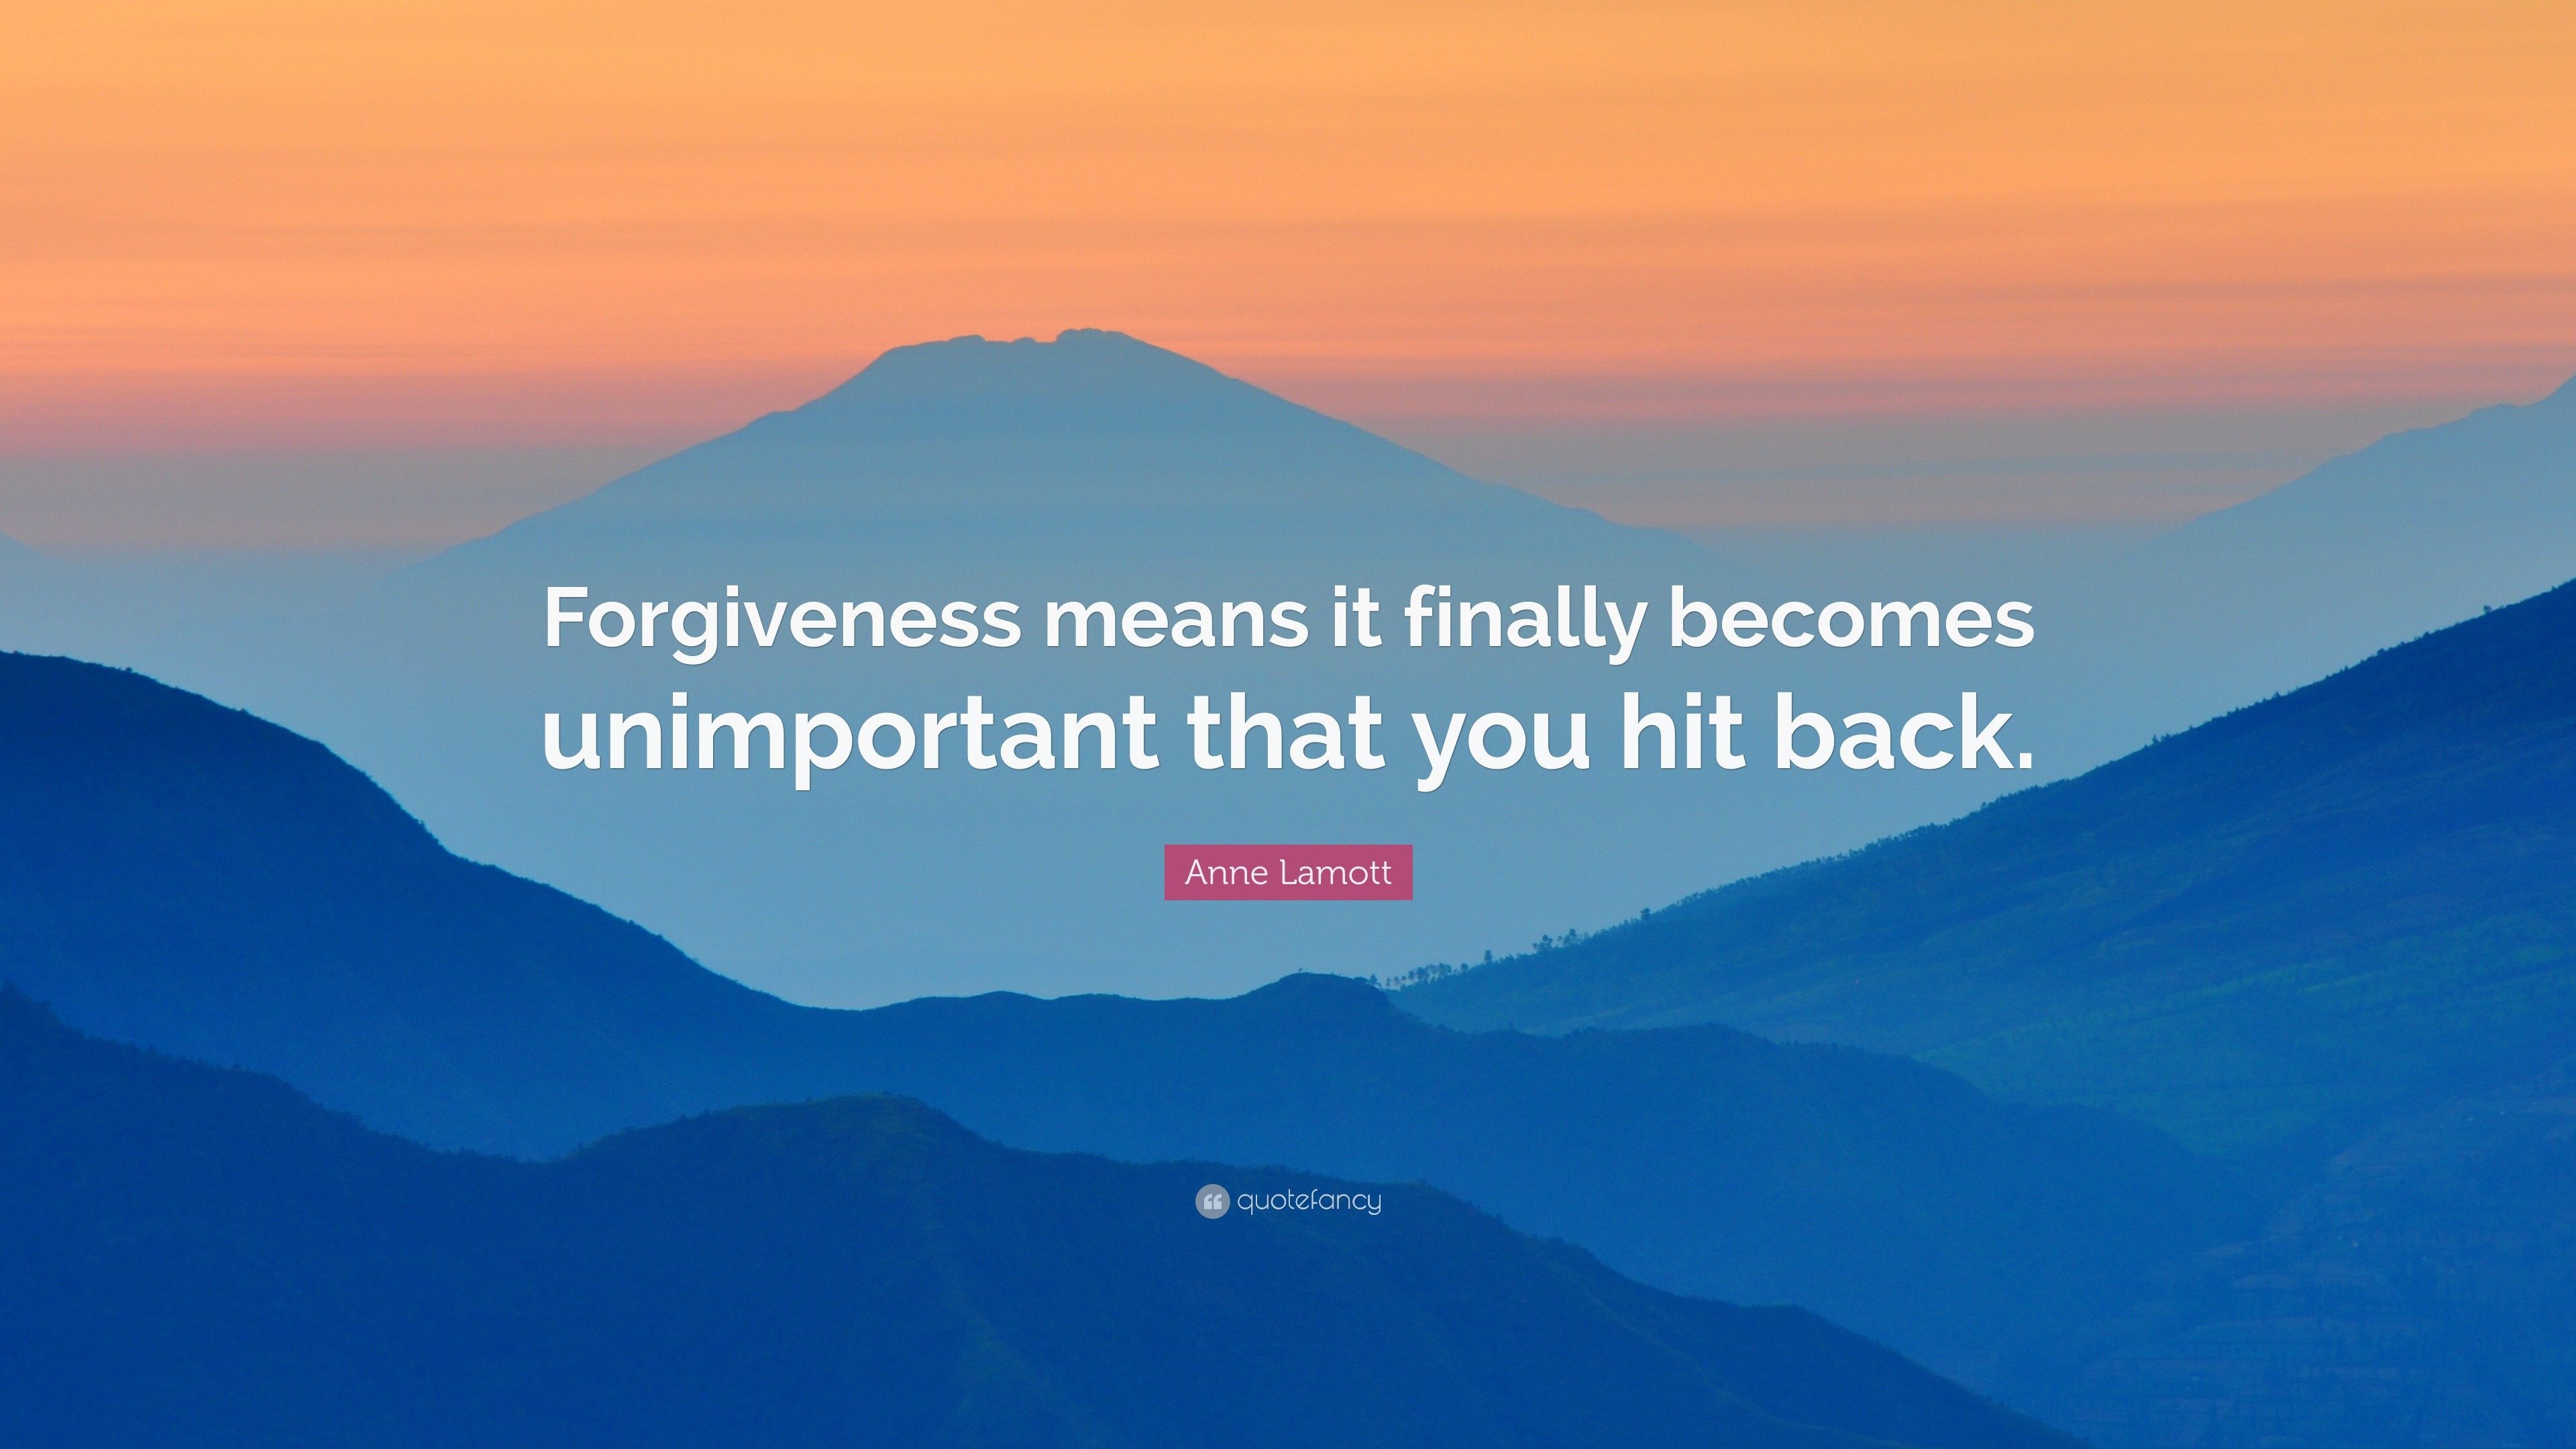 1876603 Anne Lamott Quote Forgiveness means it finally becomes unimportant